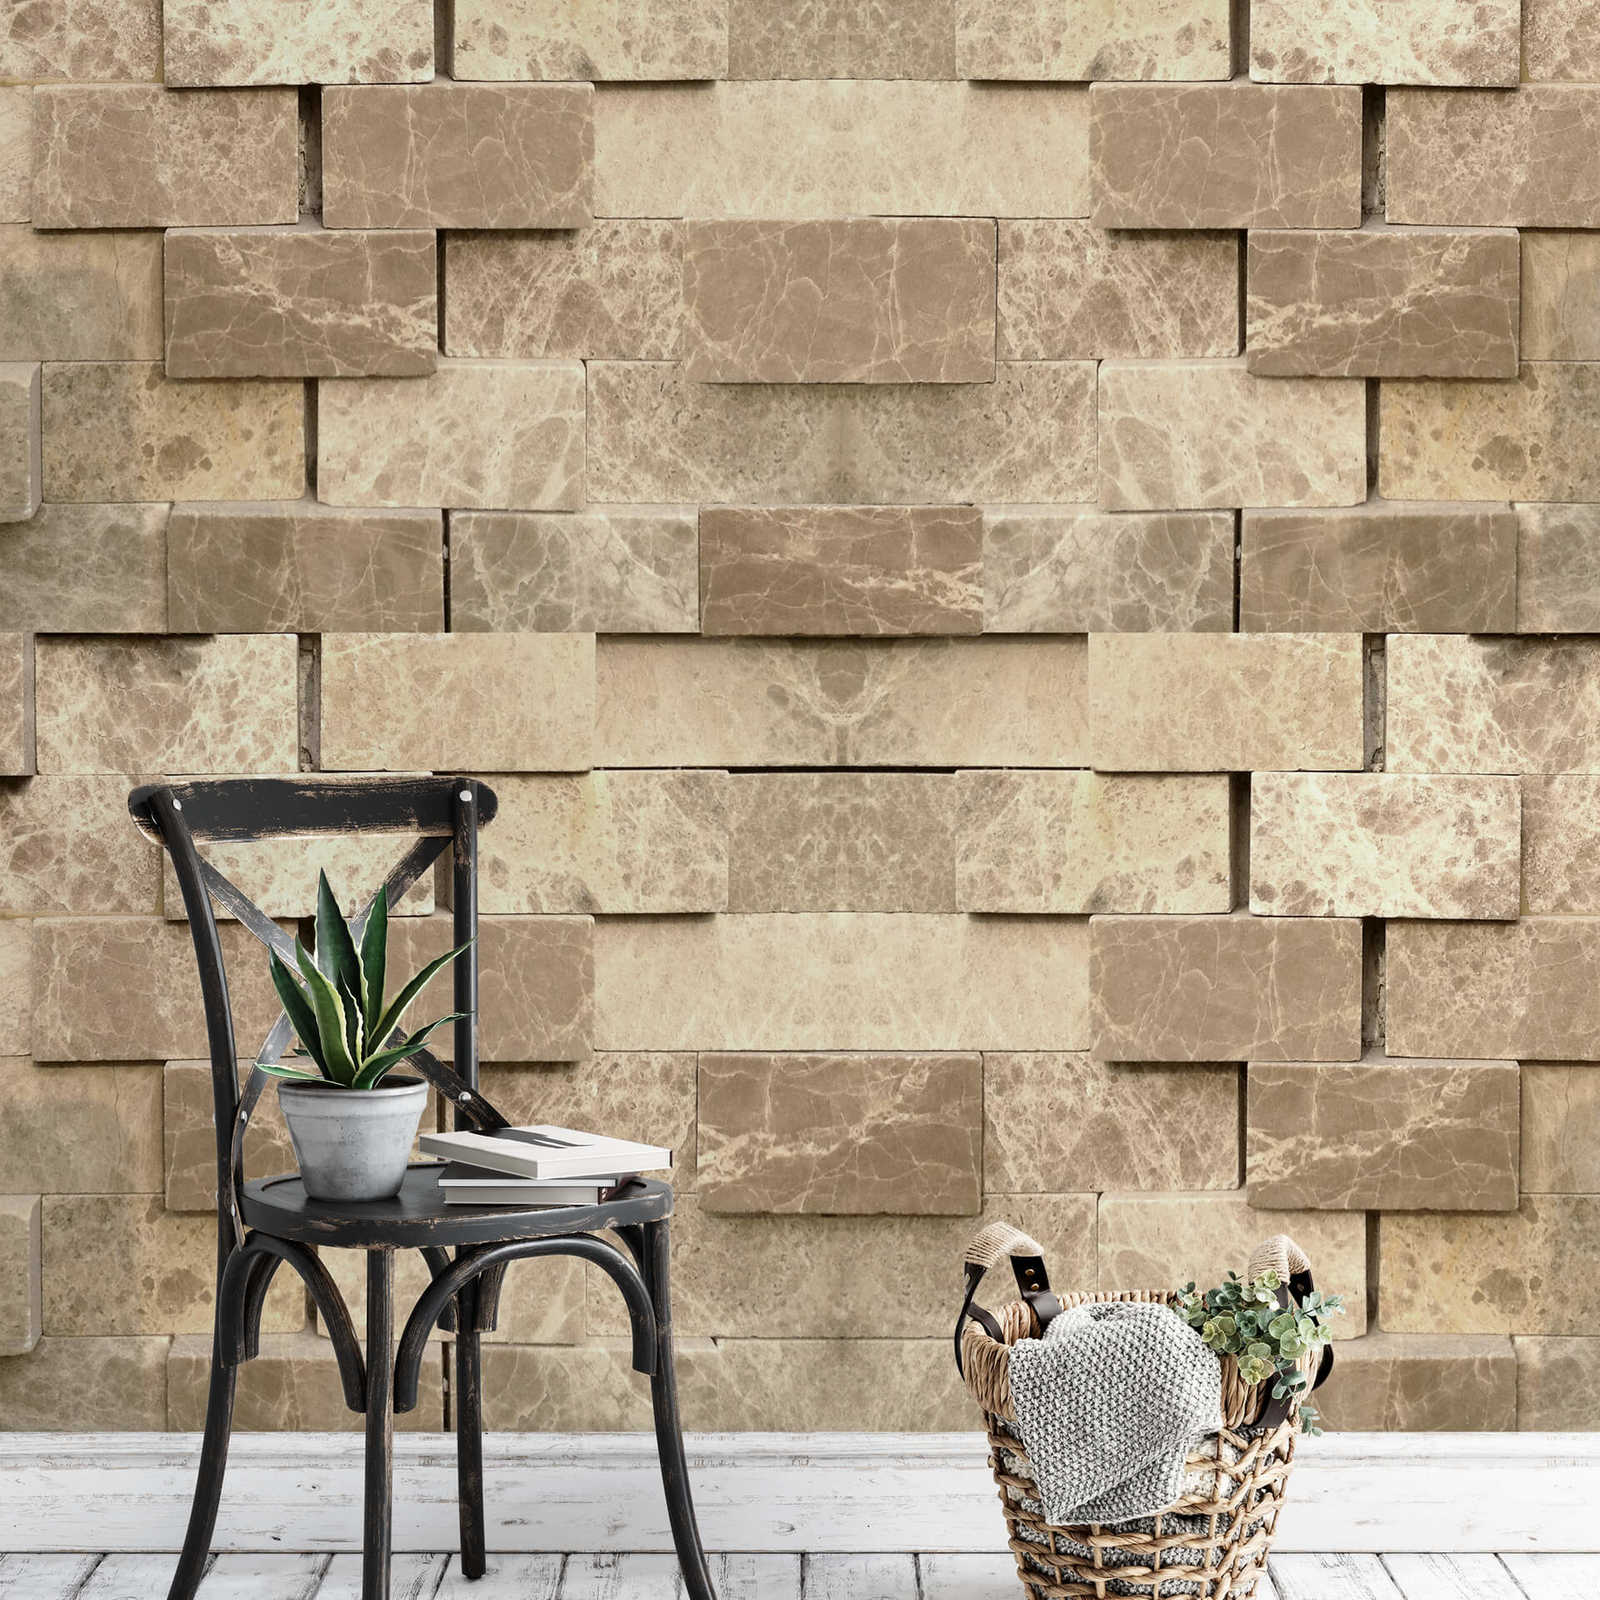             Photo wallpaper 3D stone look wall - grey, white
        